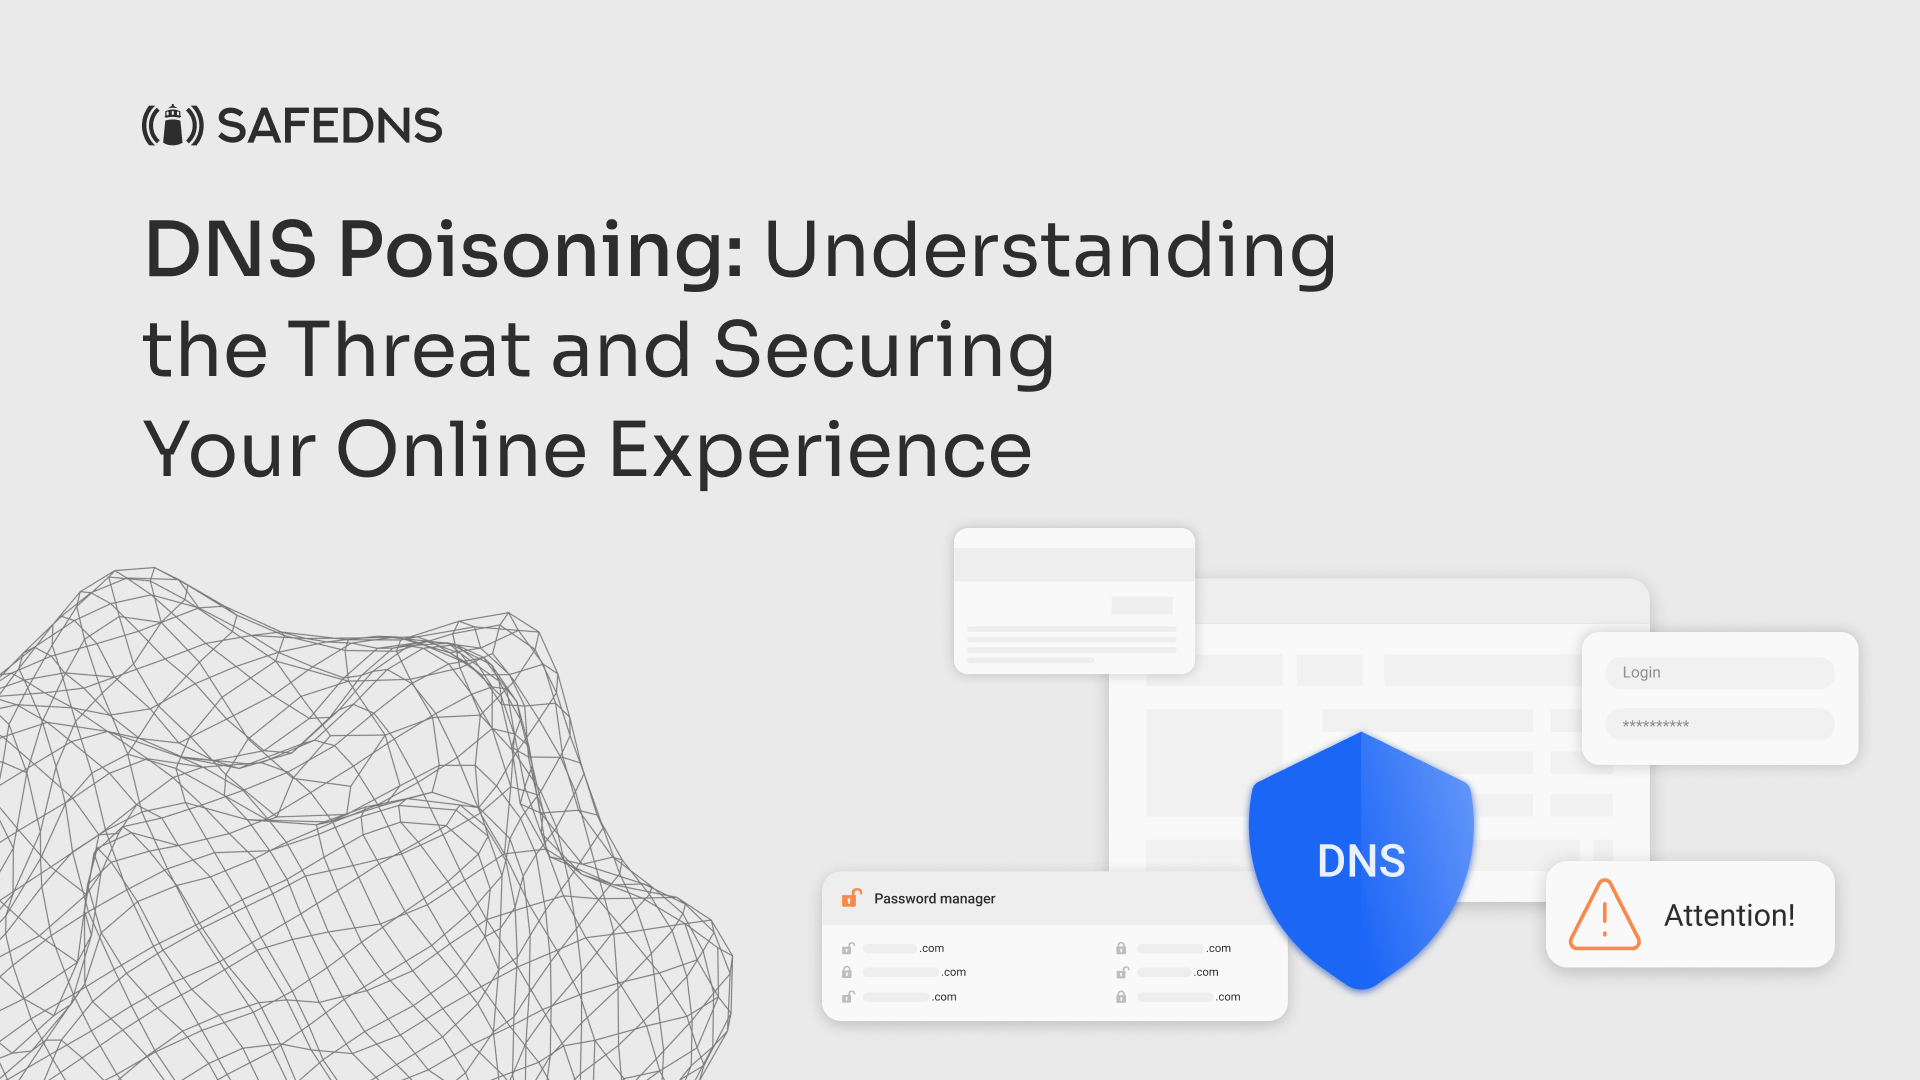 DNS Poisoning: Understanding the Threat and Securing Your Online Experience